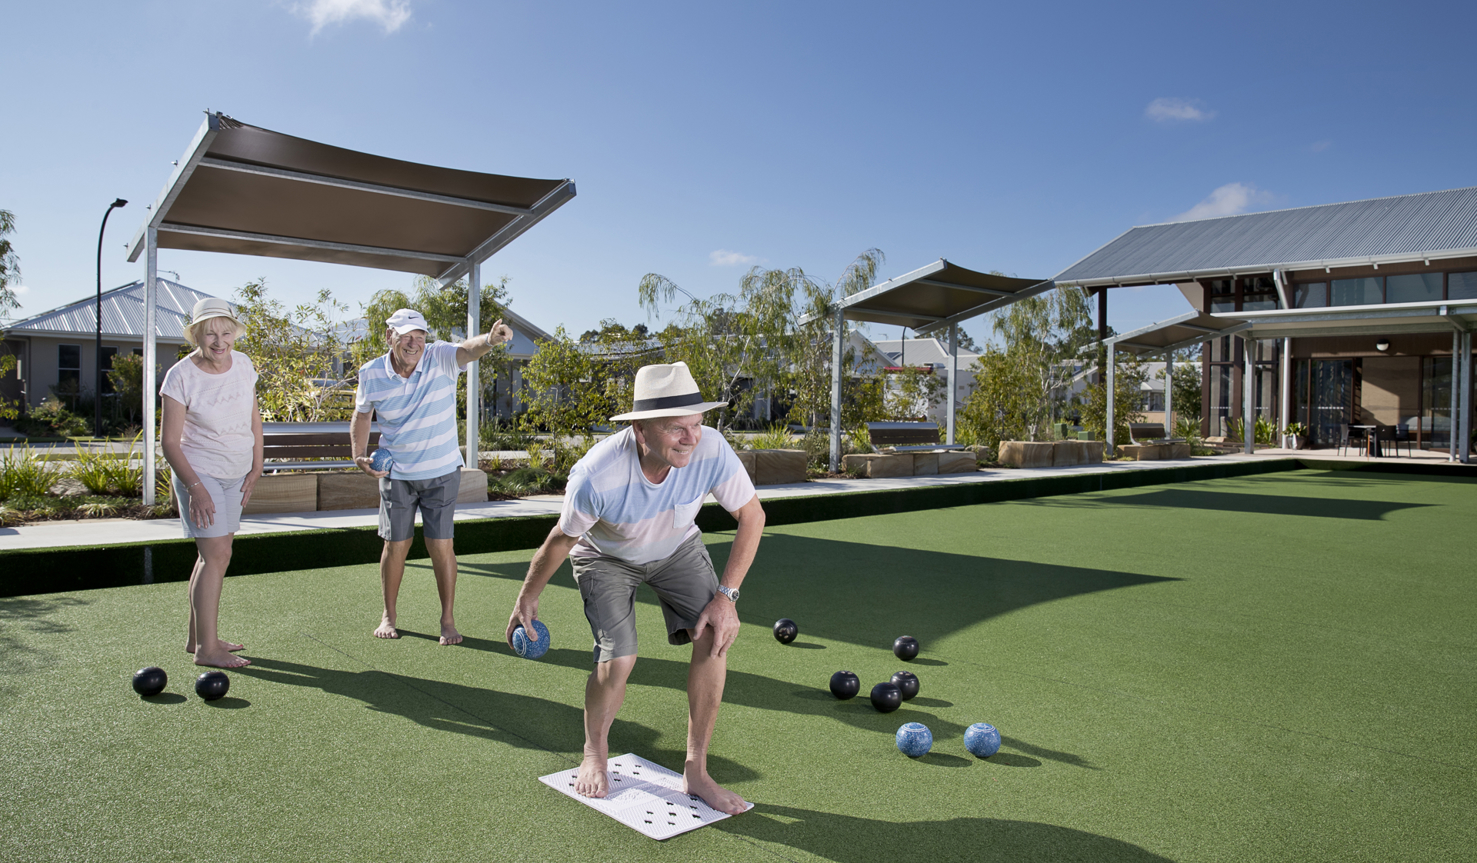 Halcyon Glades residents playing bowls on a green court